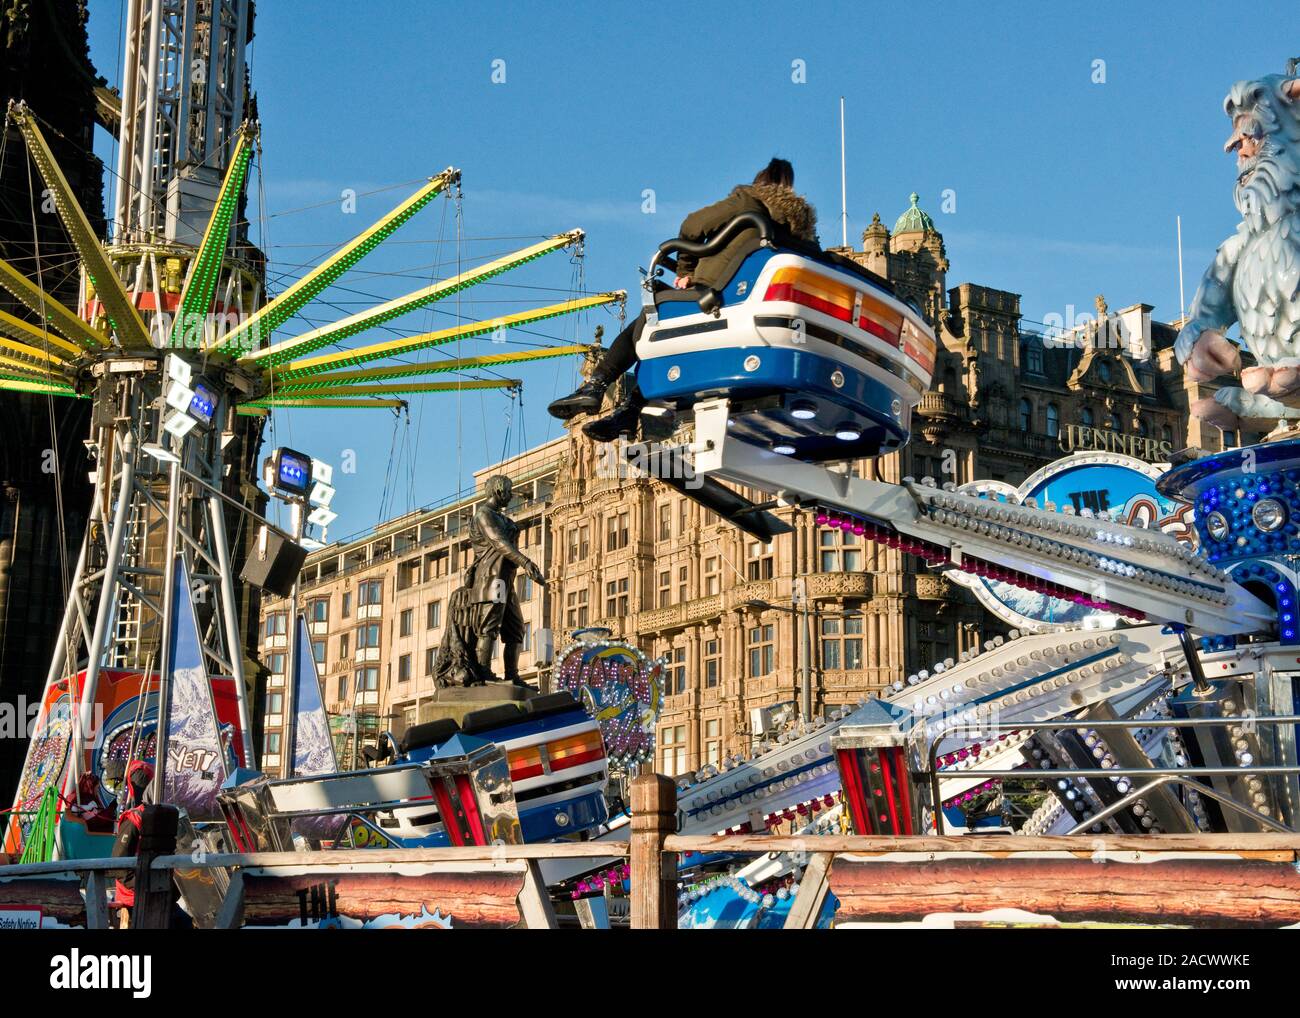 Yeti and Star Flyer fairground rides. Edinburgh Christmas Market and Fair. Jenners Department store on Princes Street in background. Scotland Stock Photo